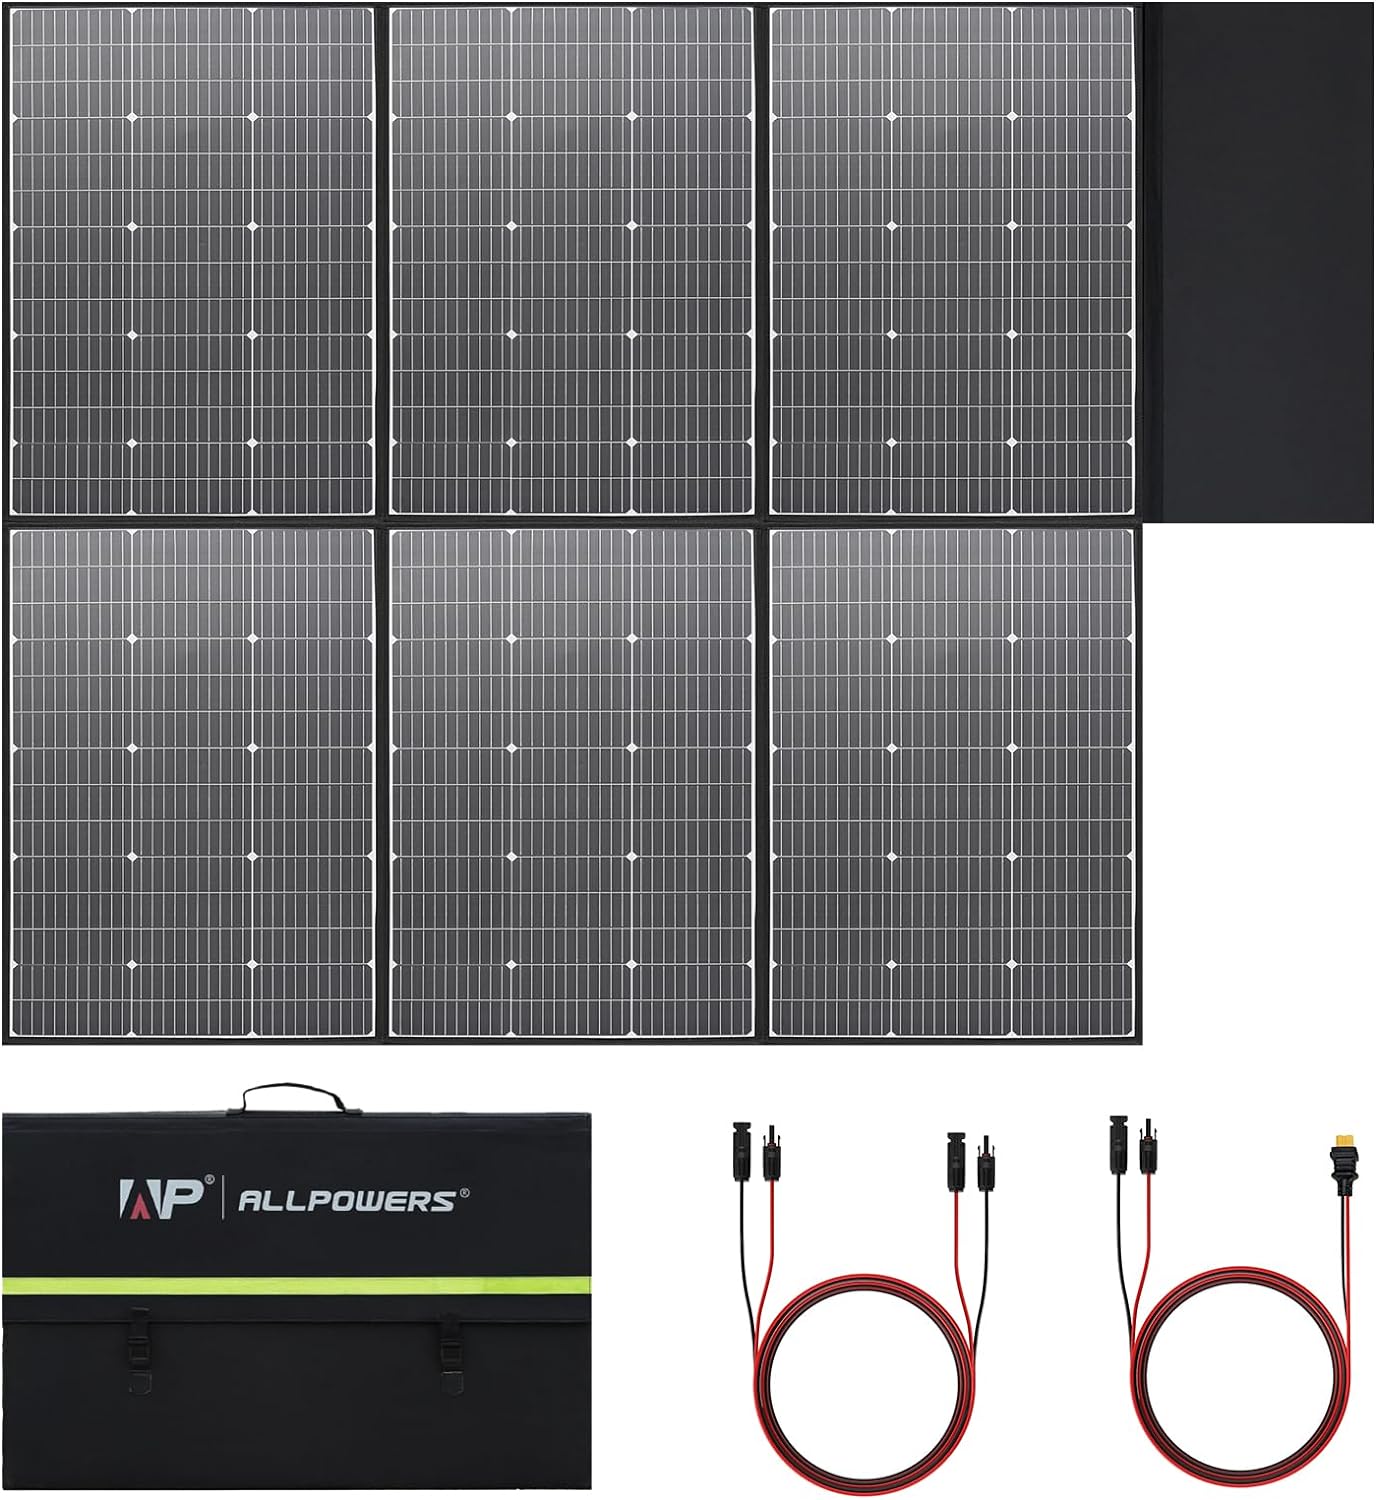 ALLPOWERS SP039 600W Solar Panel Review